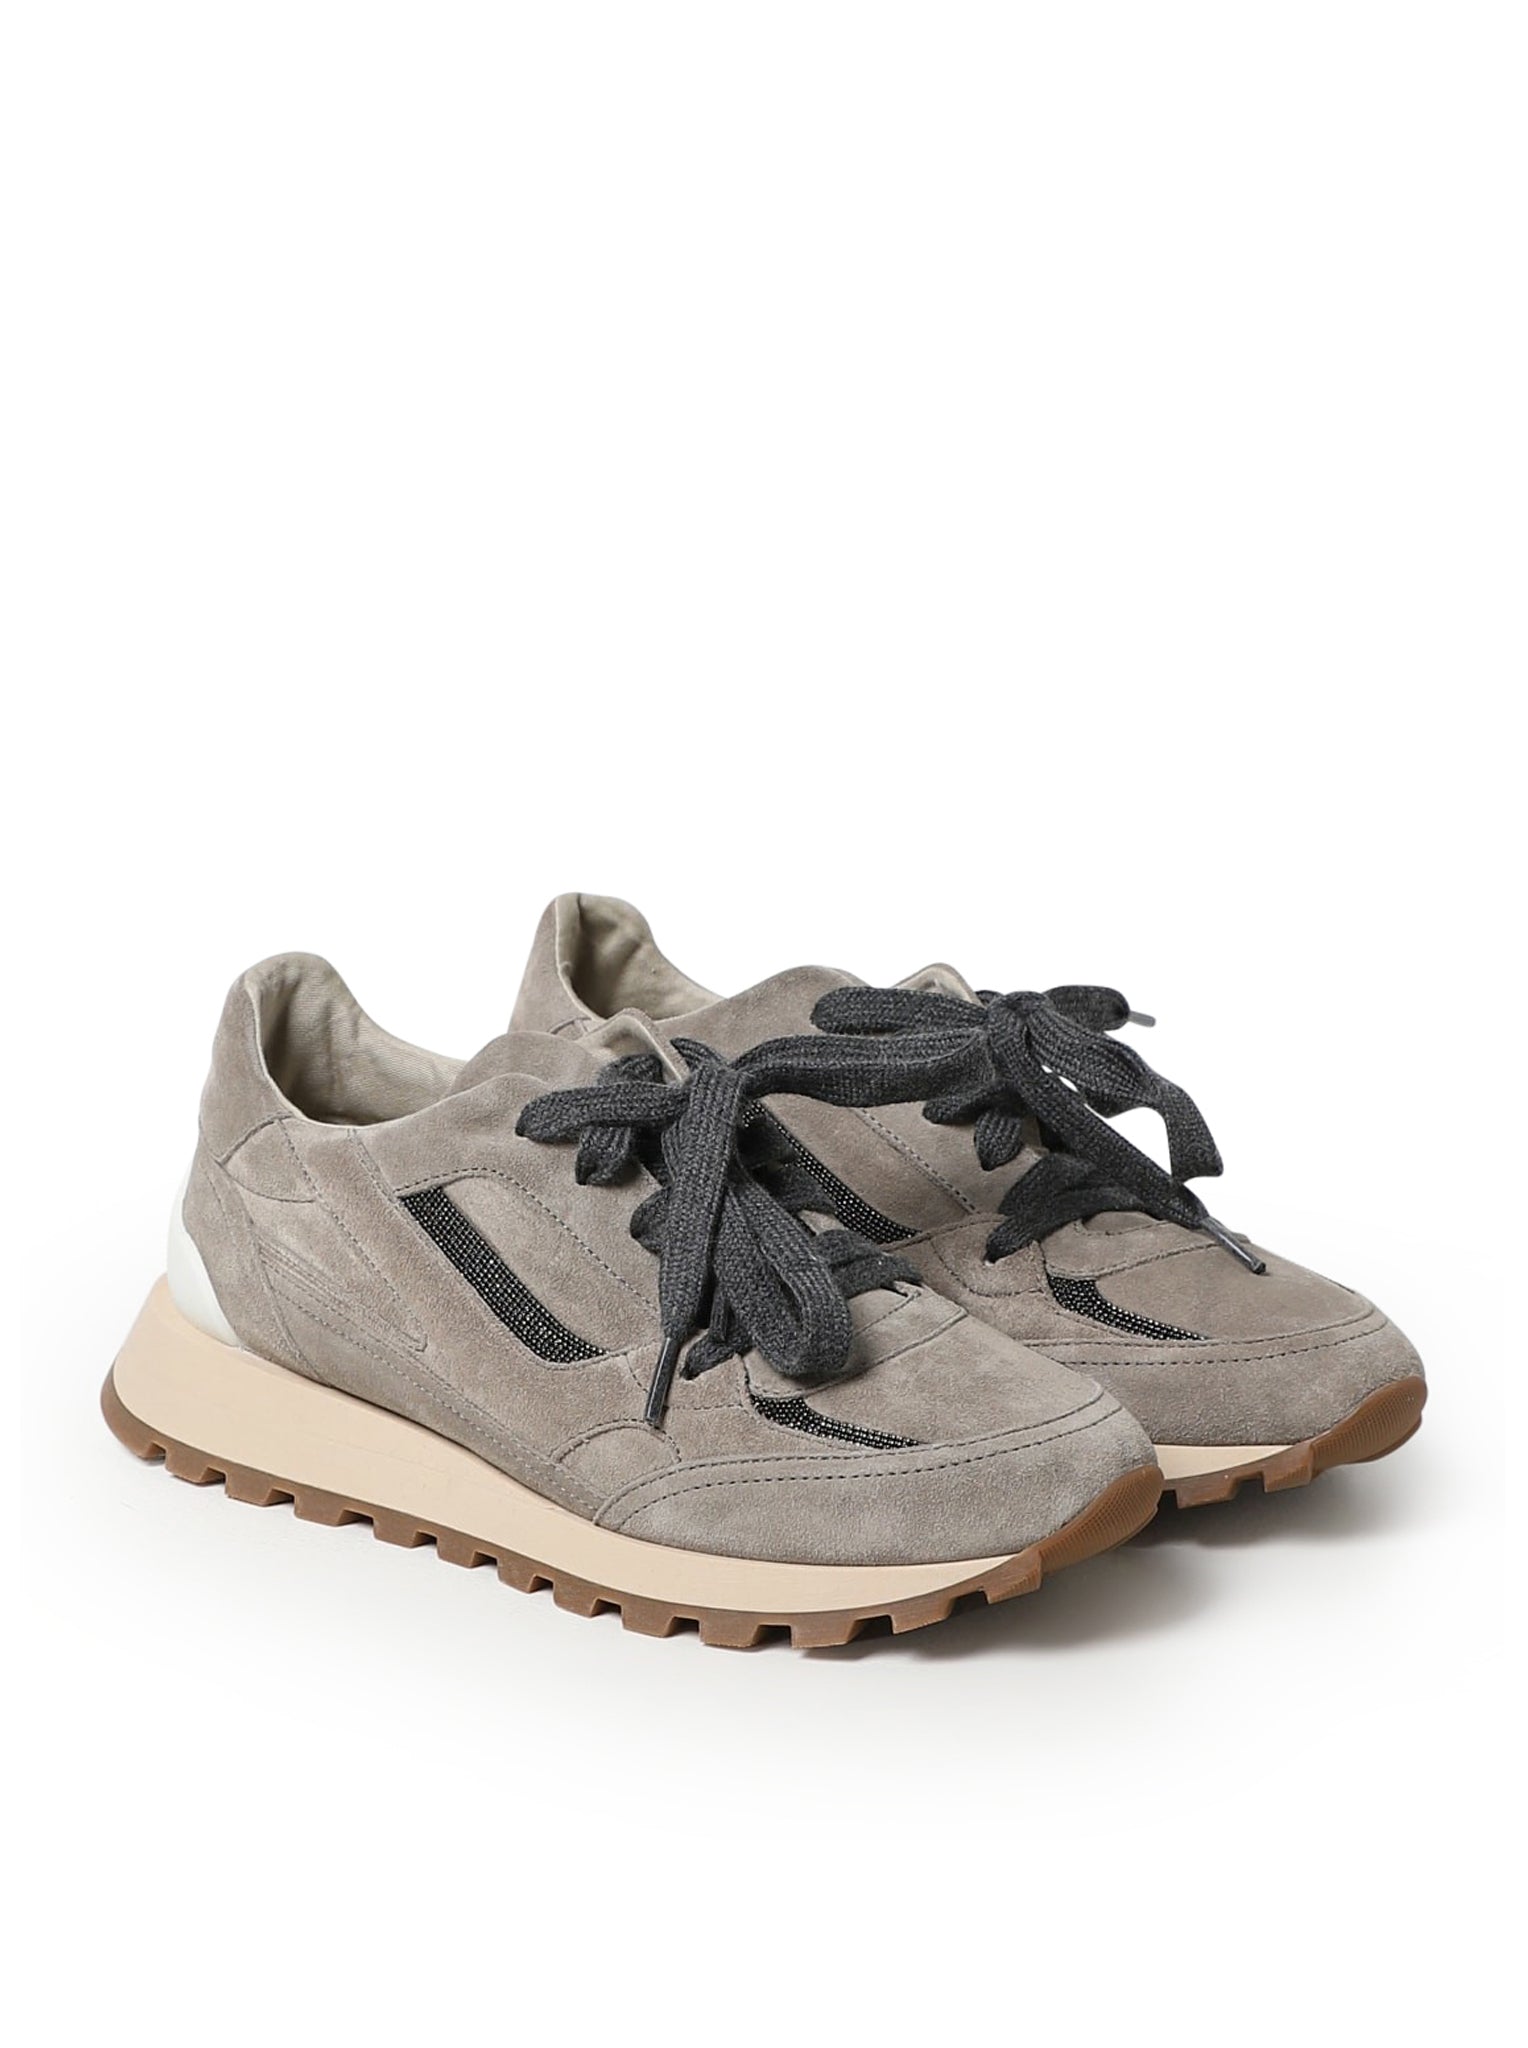 Brunello Cucinelli sneakers in suede with furniture